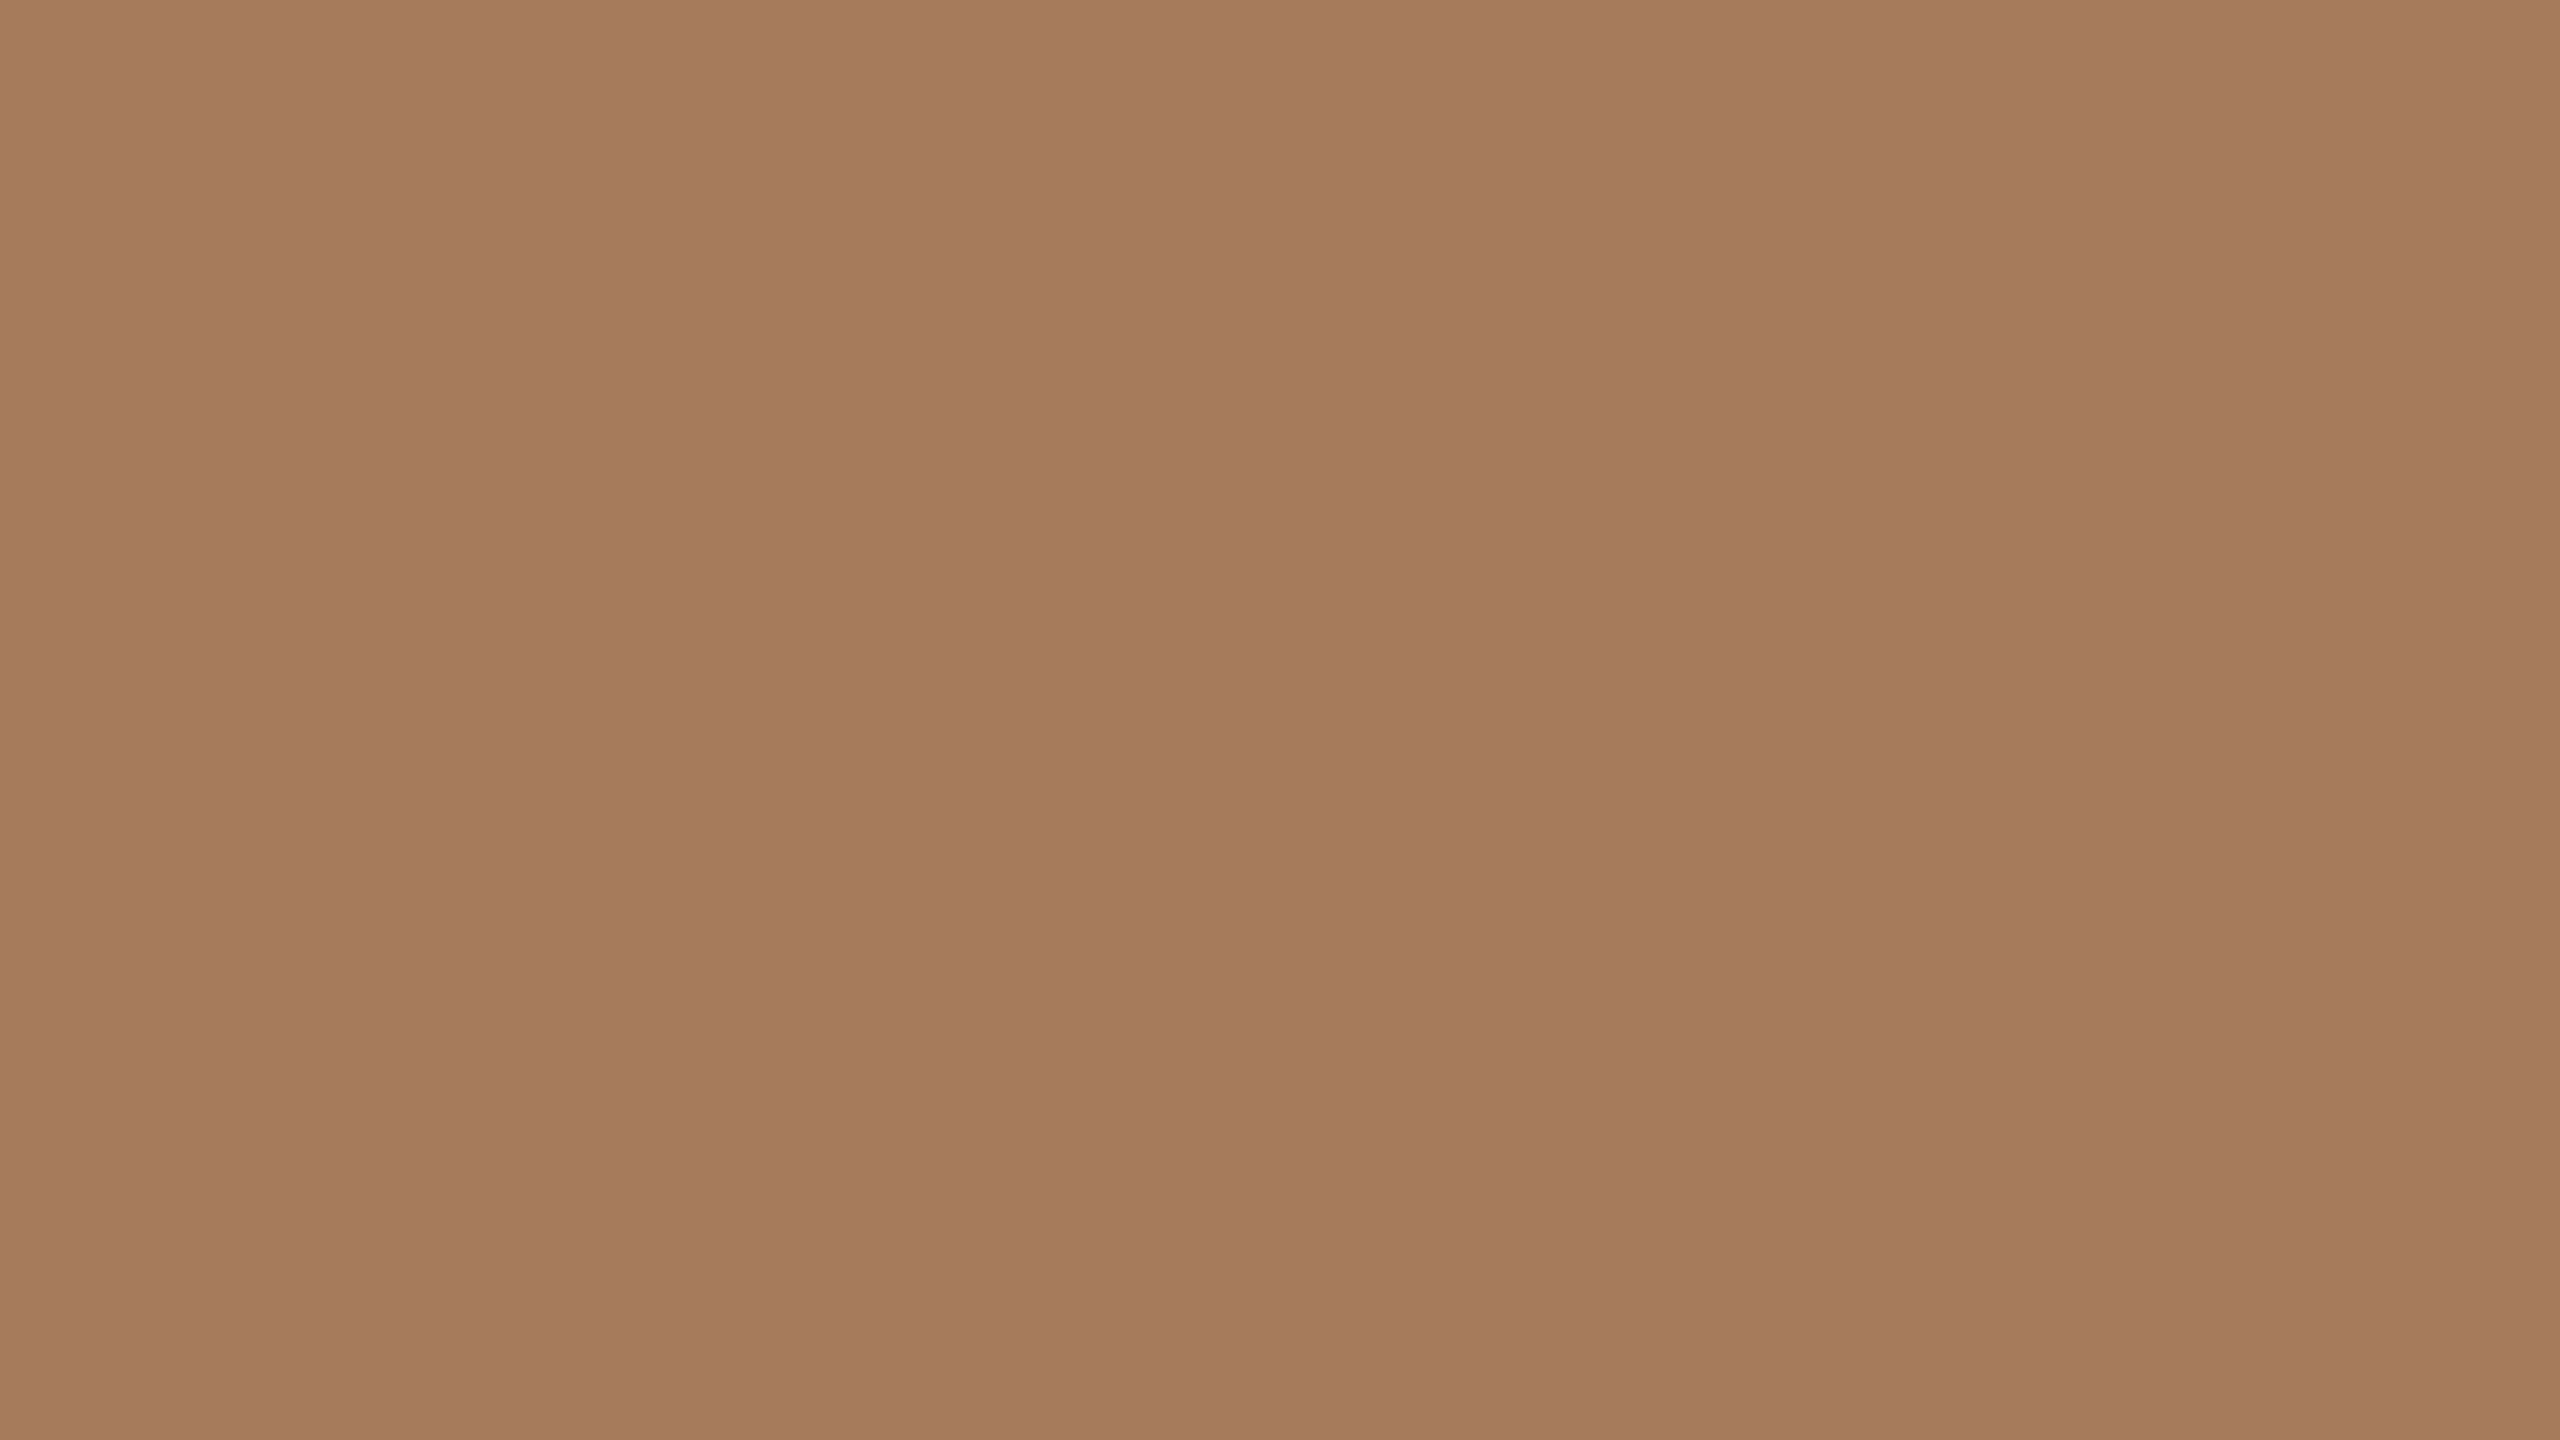 2560x1440 Tuscan Tan Solid Color Background